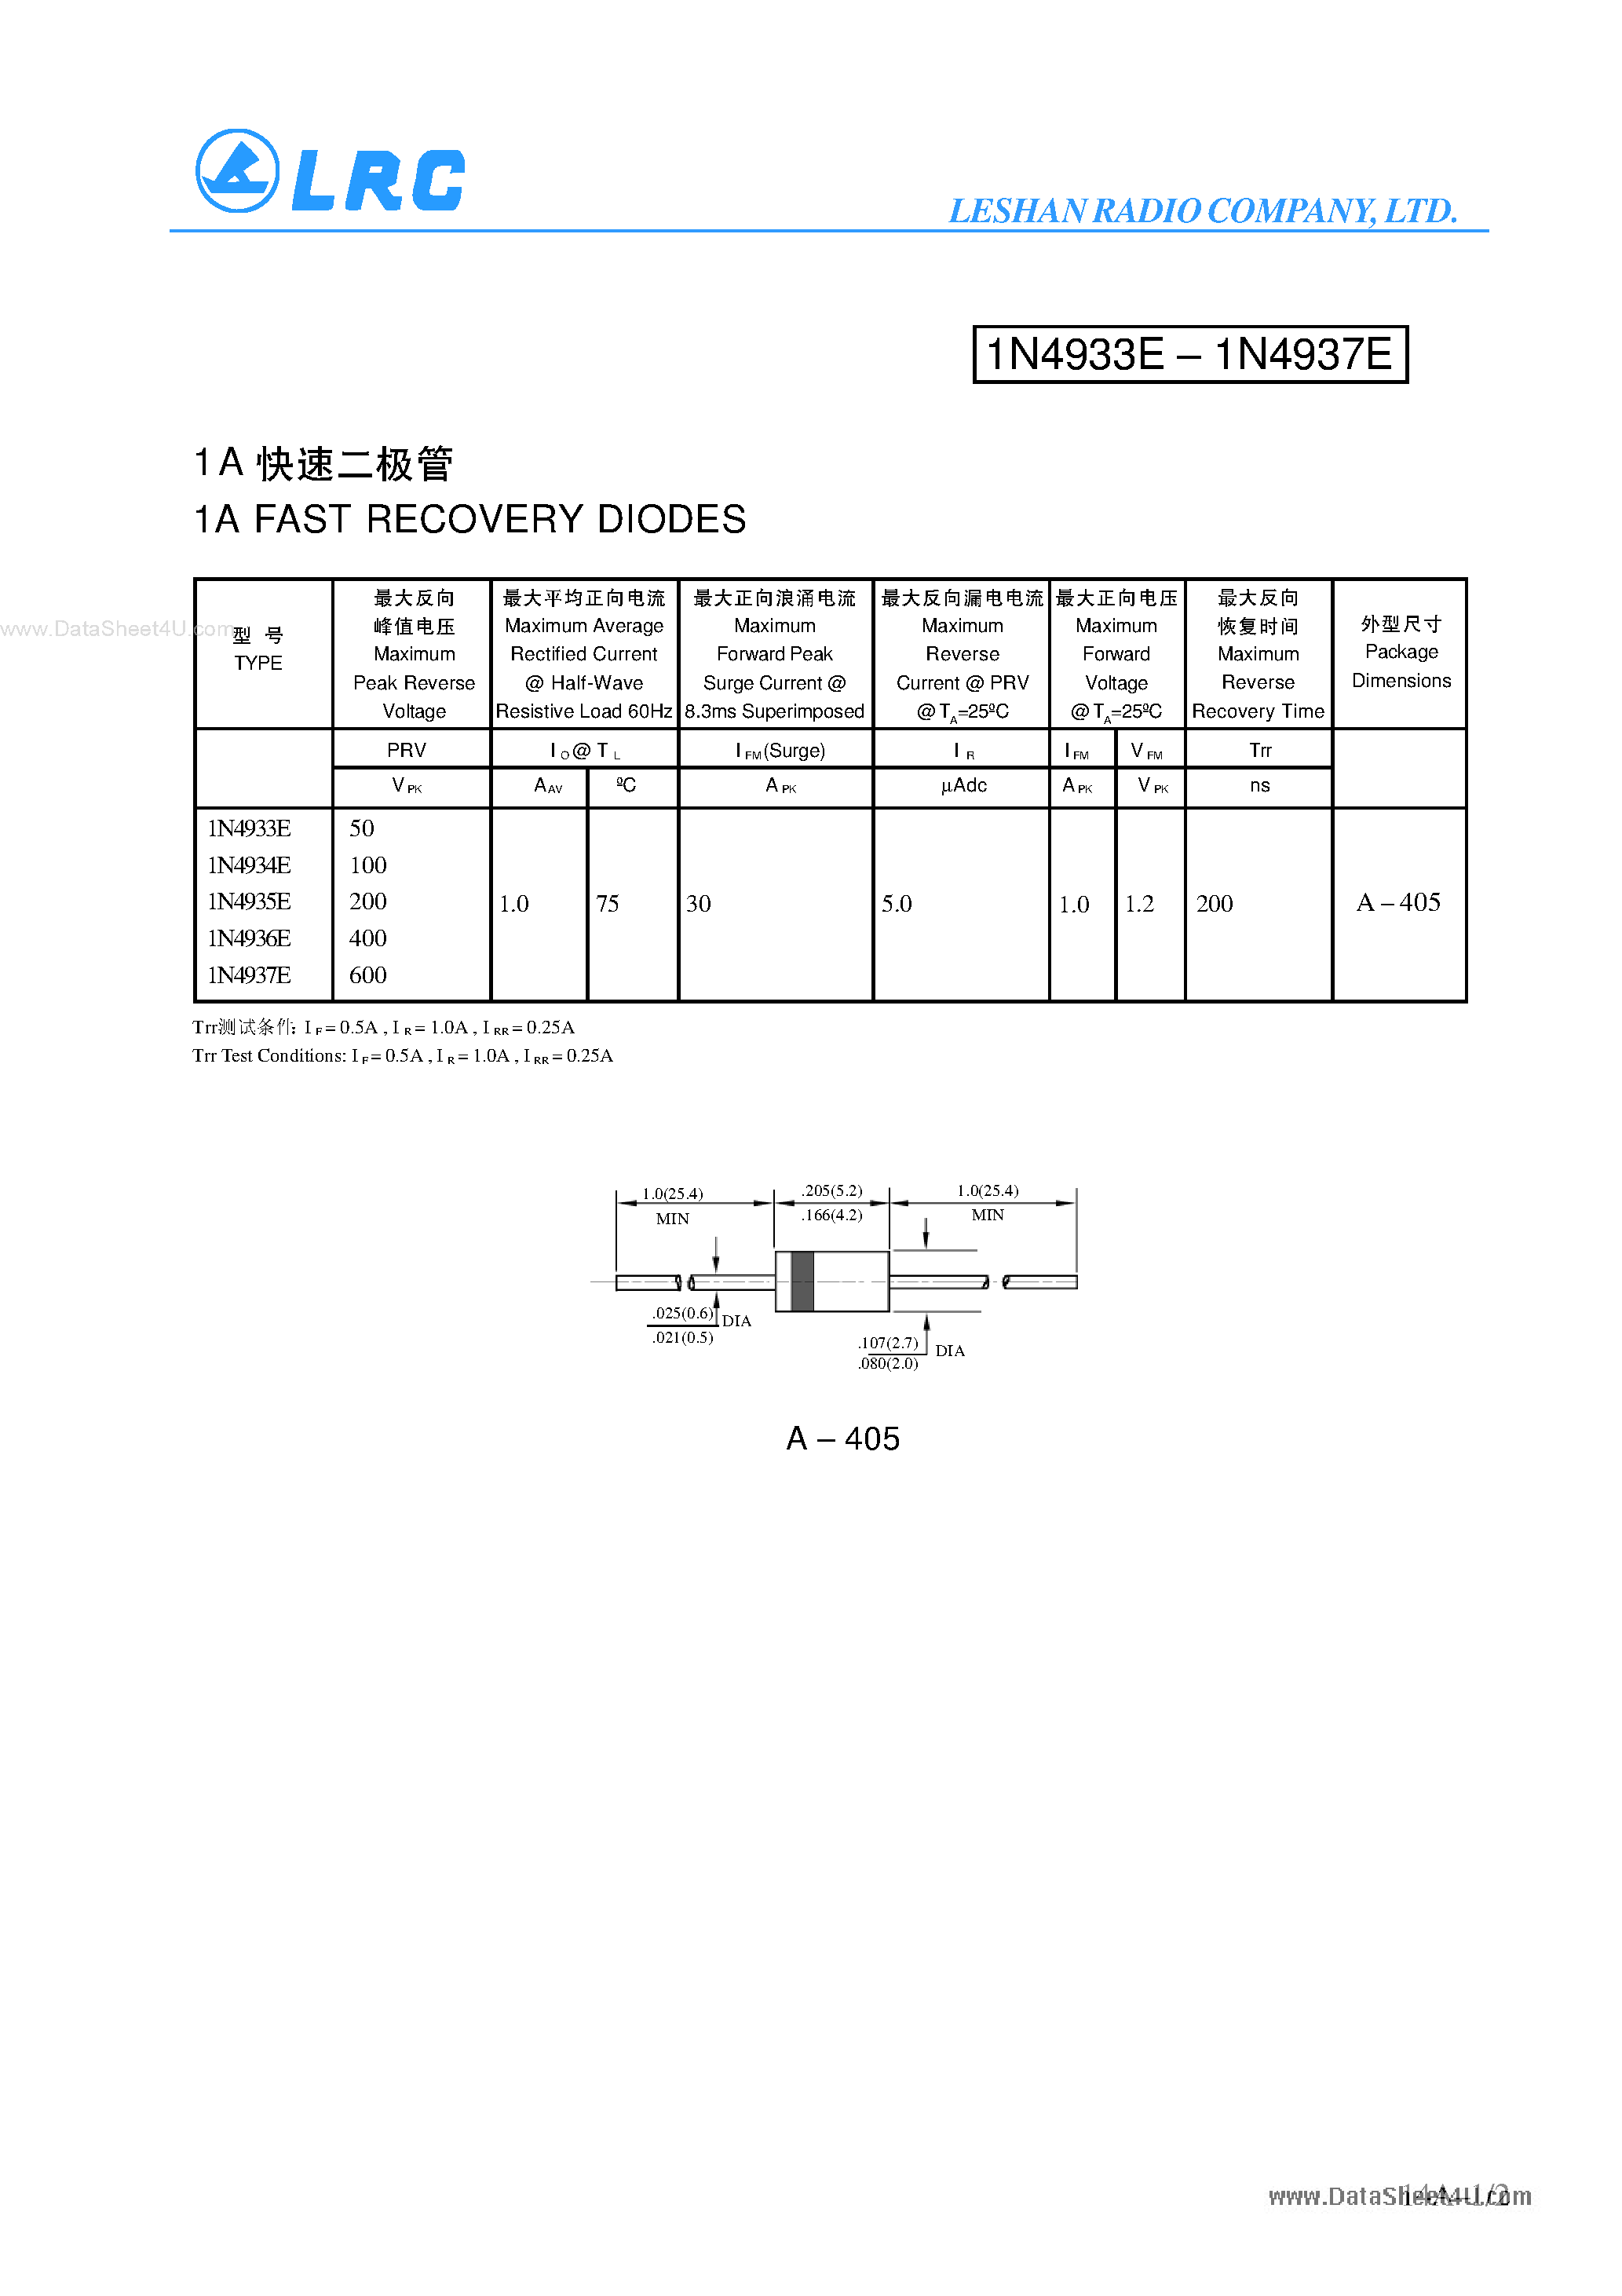 Datasheet IN4933E - (IN4933E - IN4937E) 1A FAST RECOVERY DIODES page 1